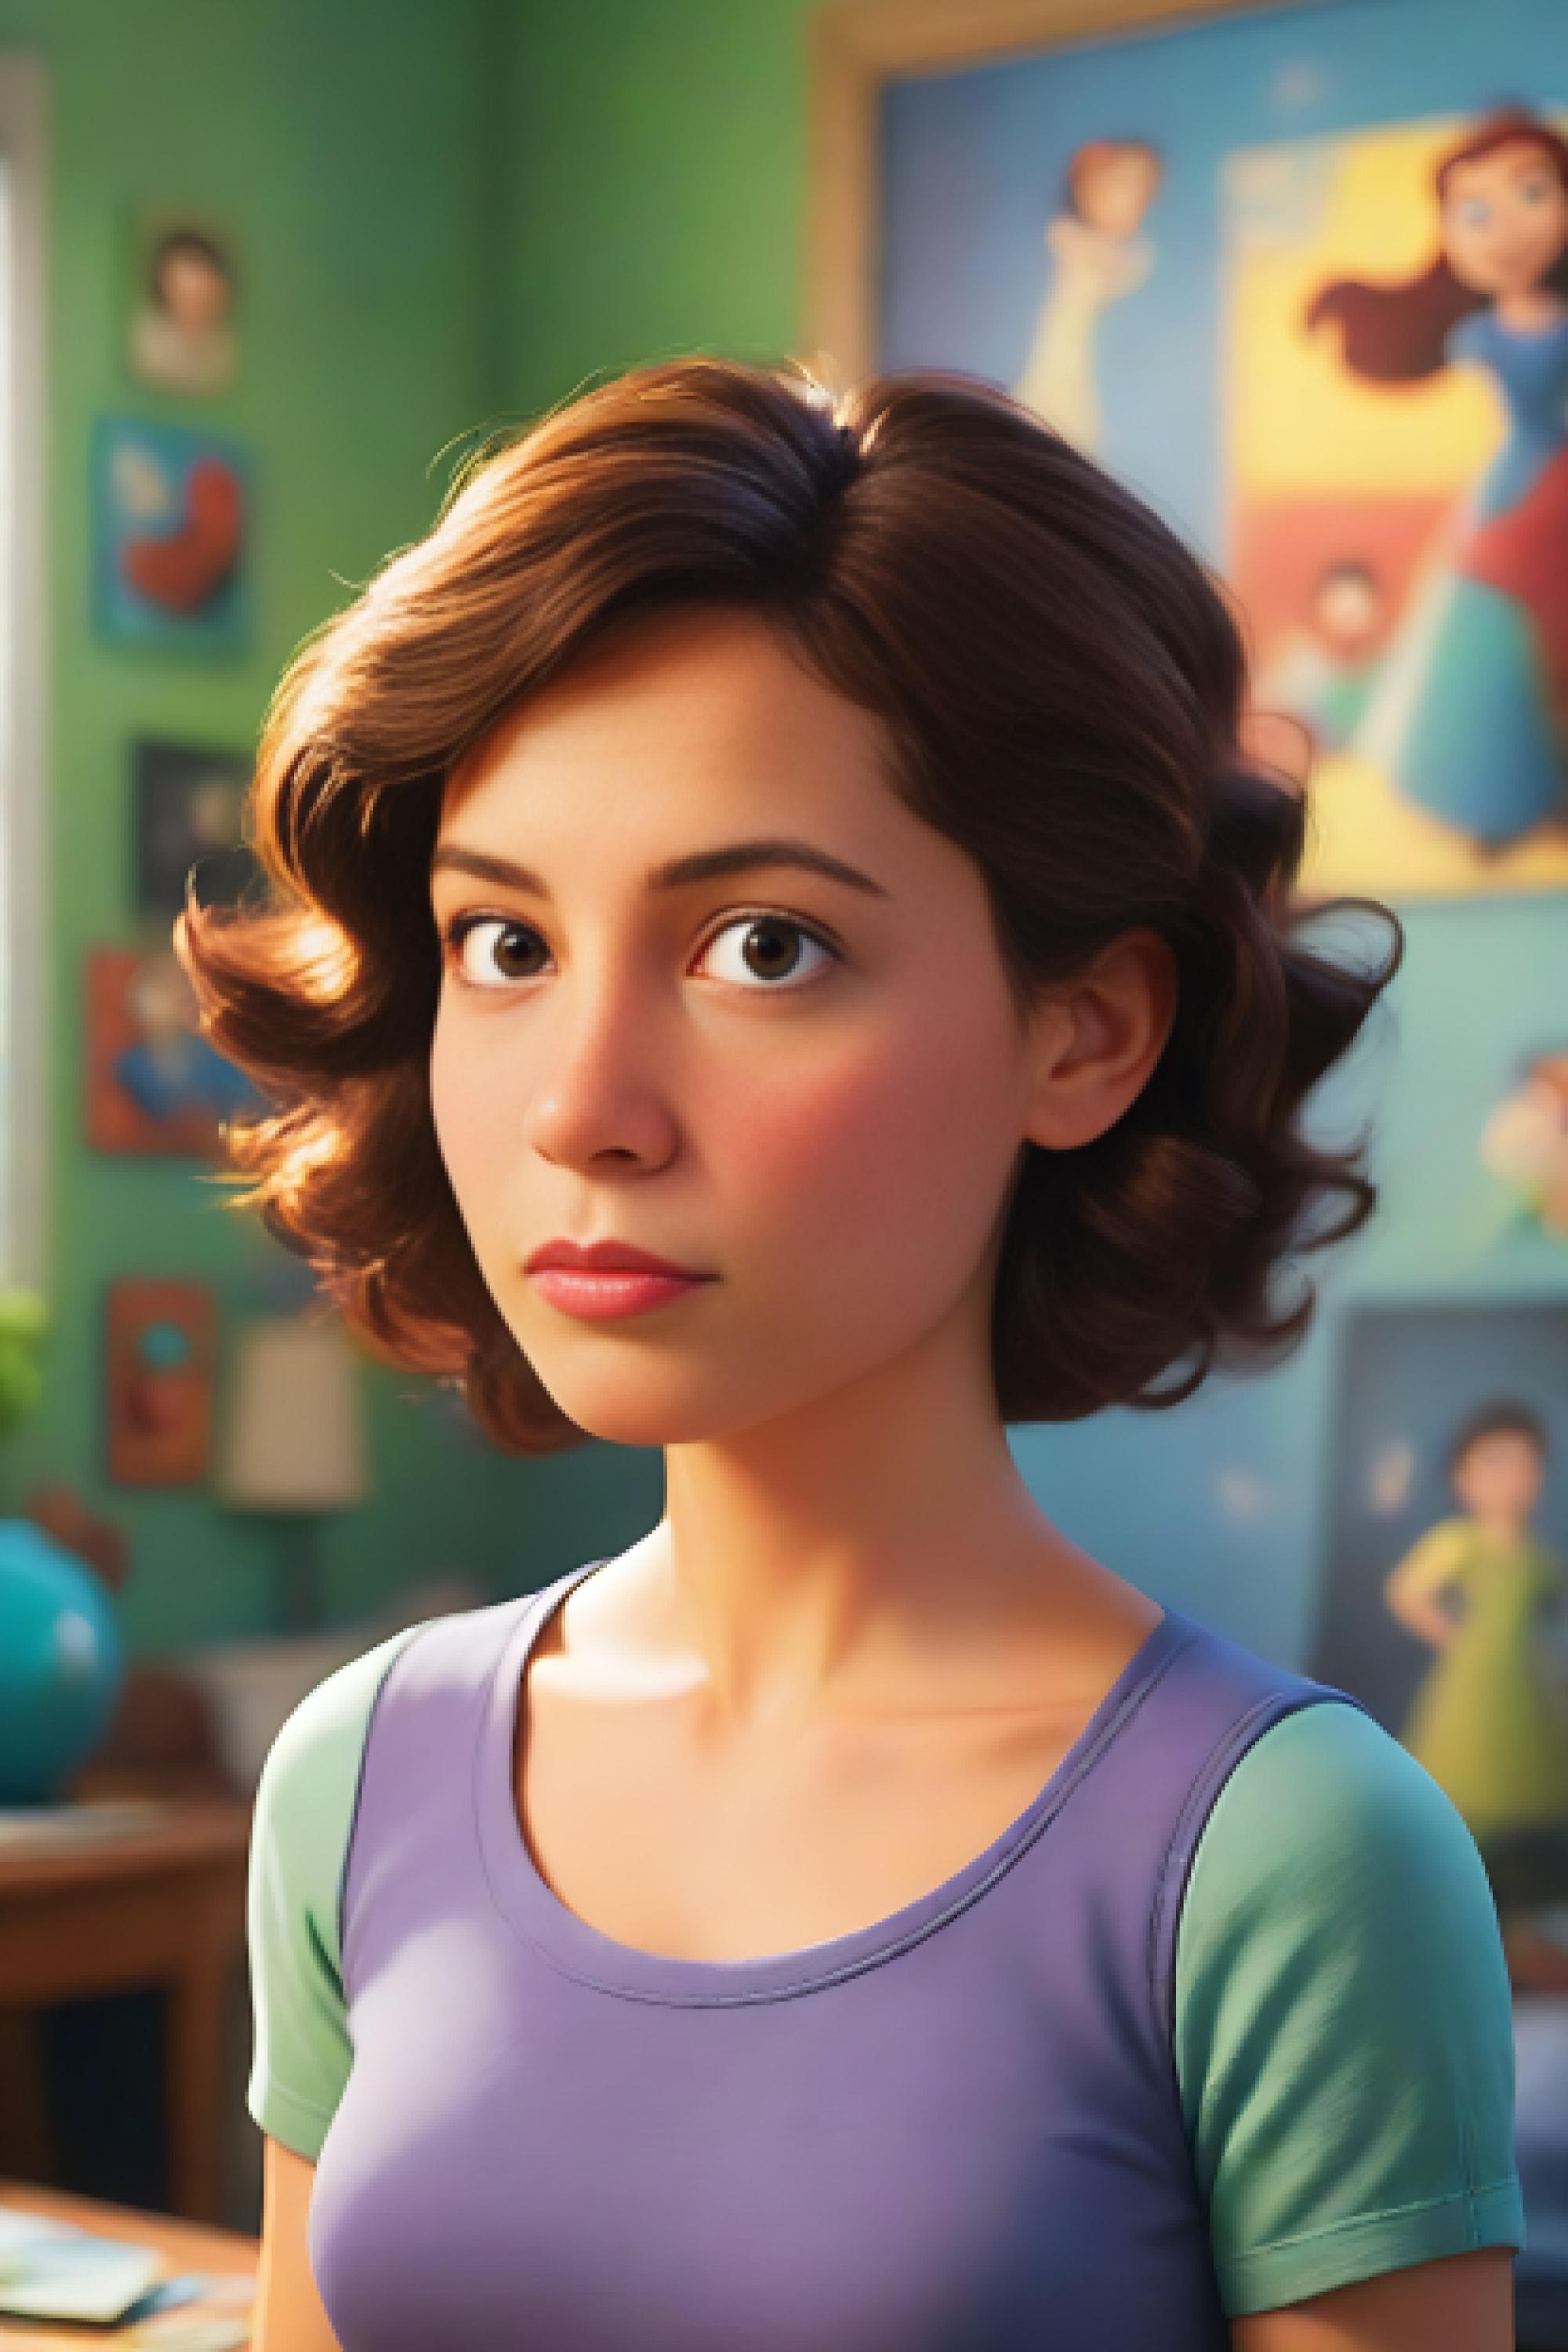 Turn your photo into a Pixar style art